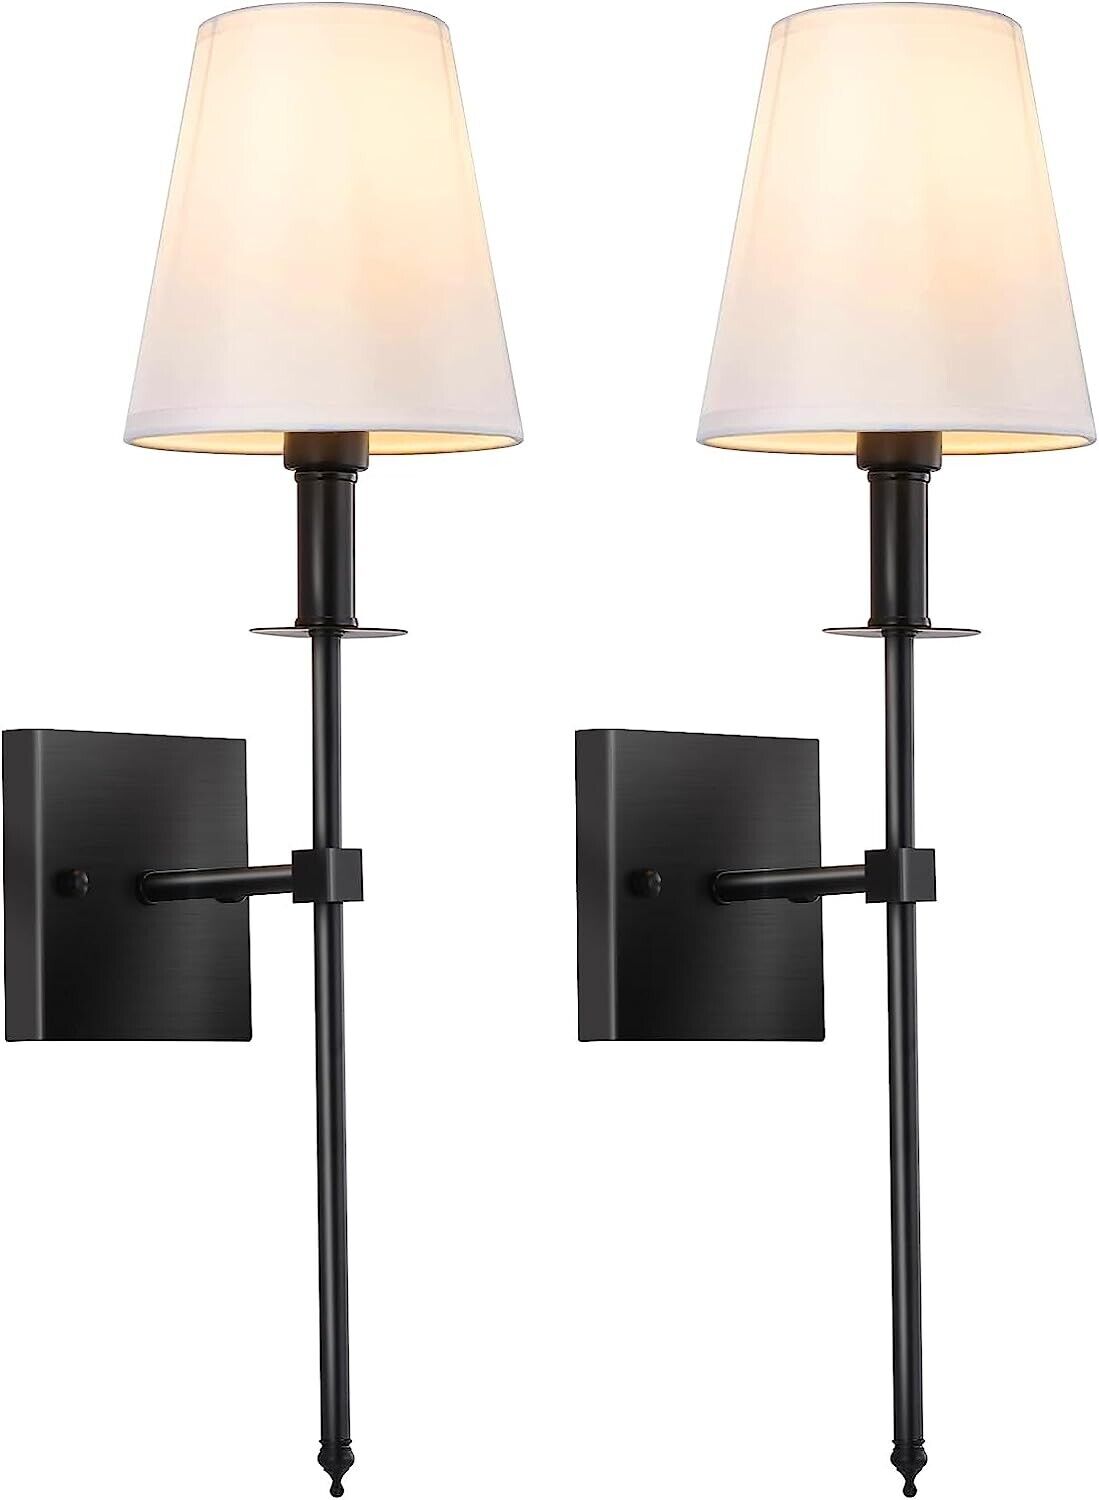 Wall Sconces Set of Two Black,2 Hardwired Wall Lights with White Fabric Shades